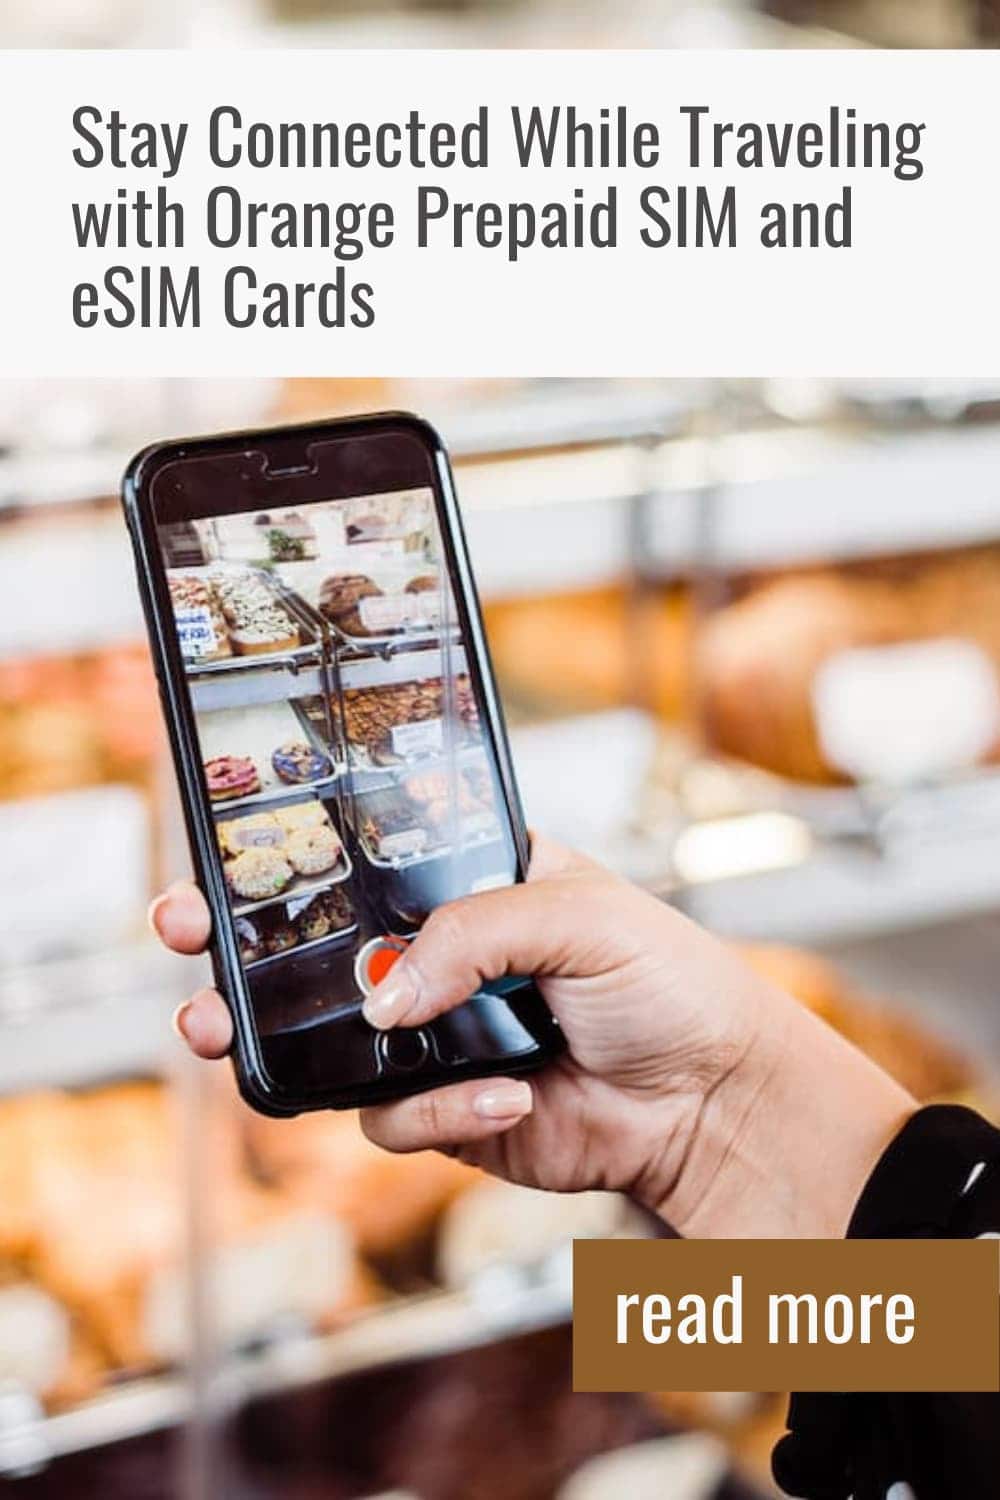 How to Use a SIM or eSim Card When Traveling Internationally